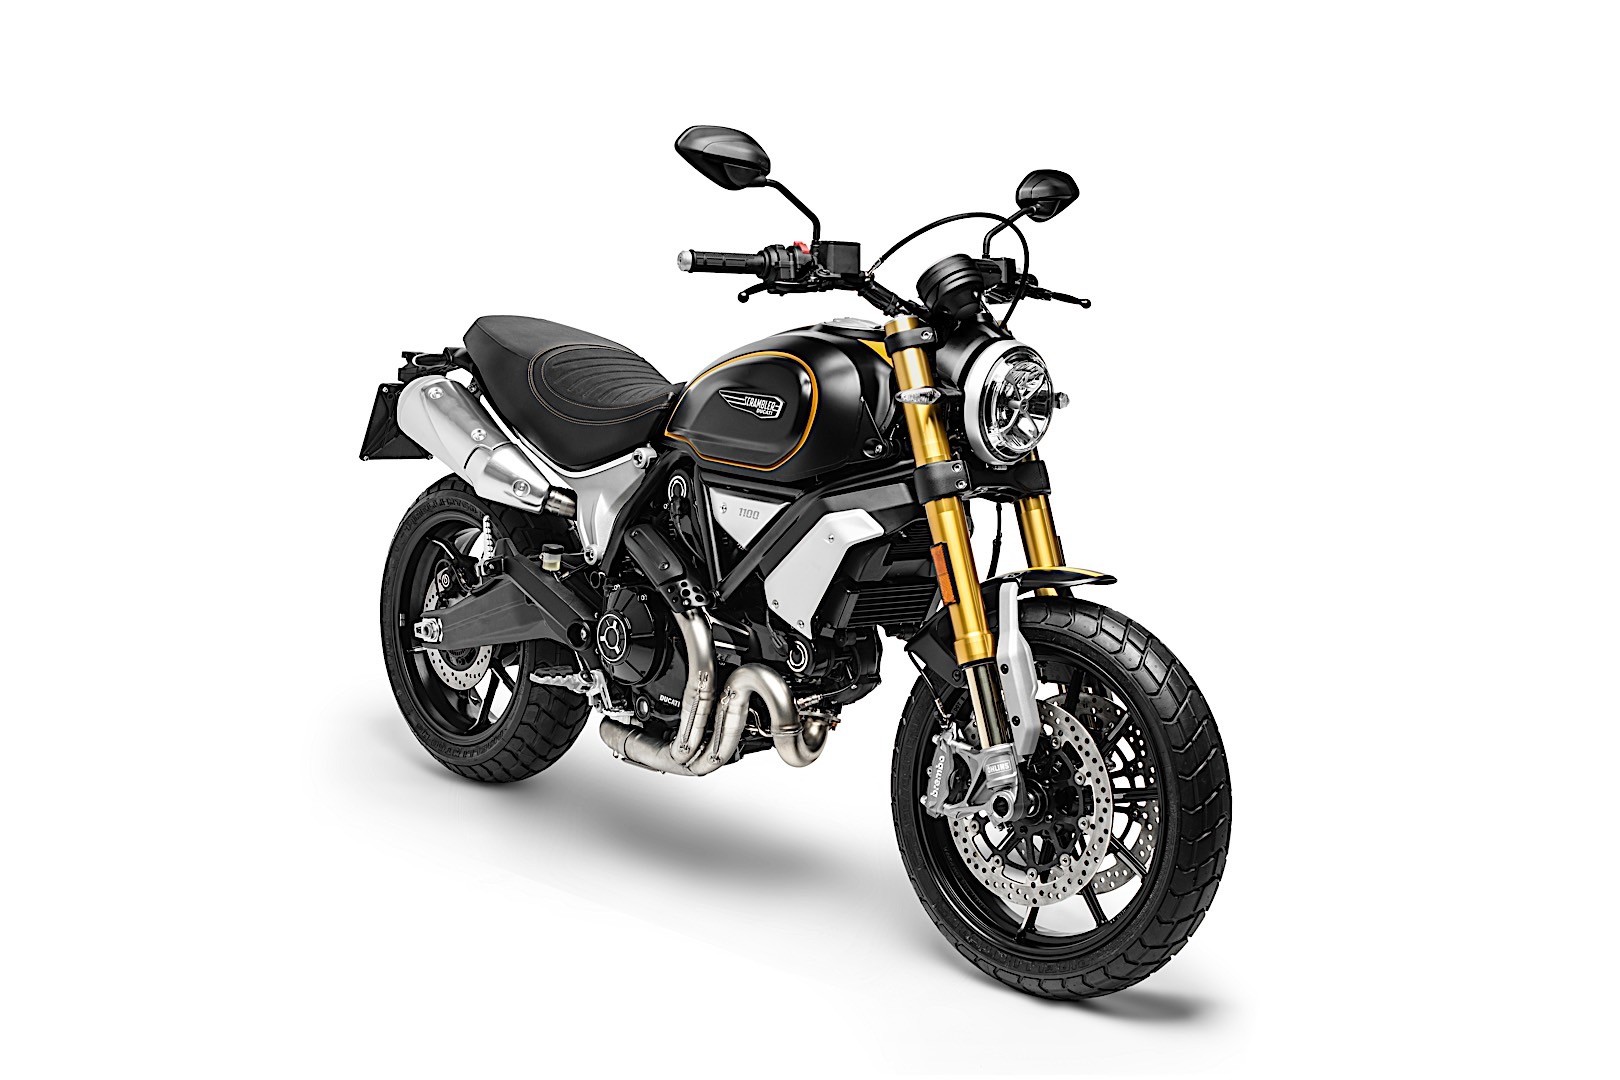 2018 Ducati Scrambler 1100 Is Out To Play With The Big Boys at EICMA ...